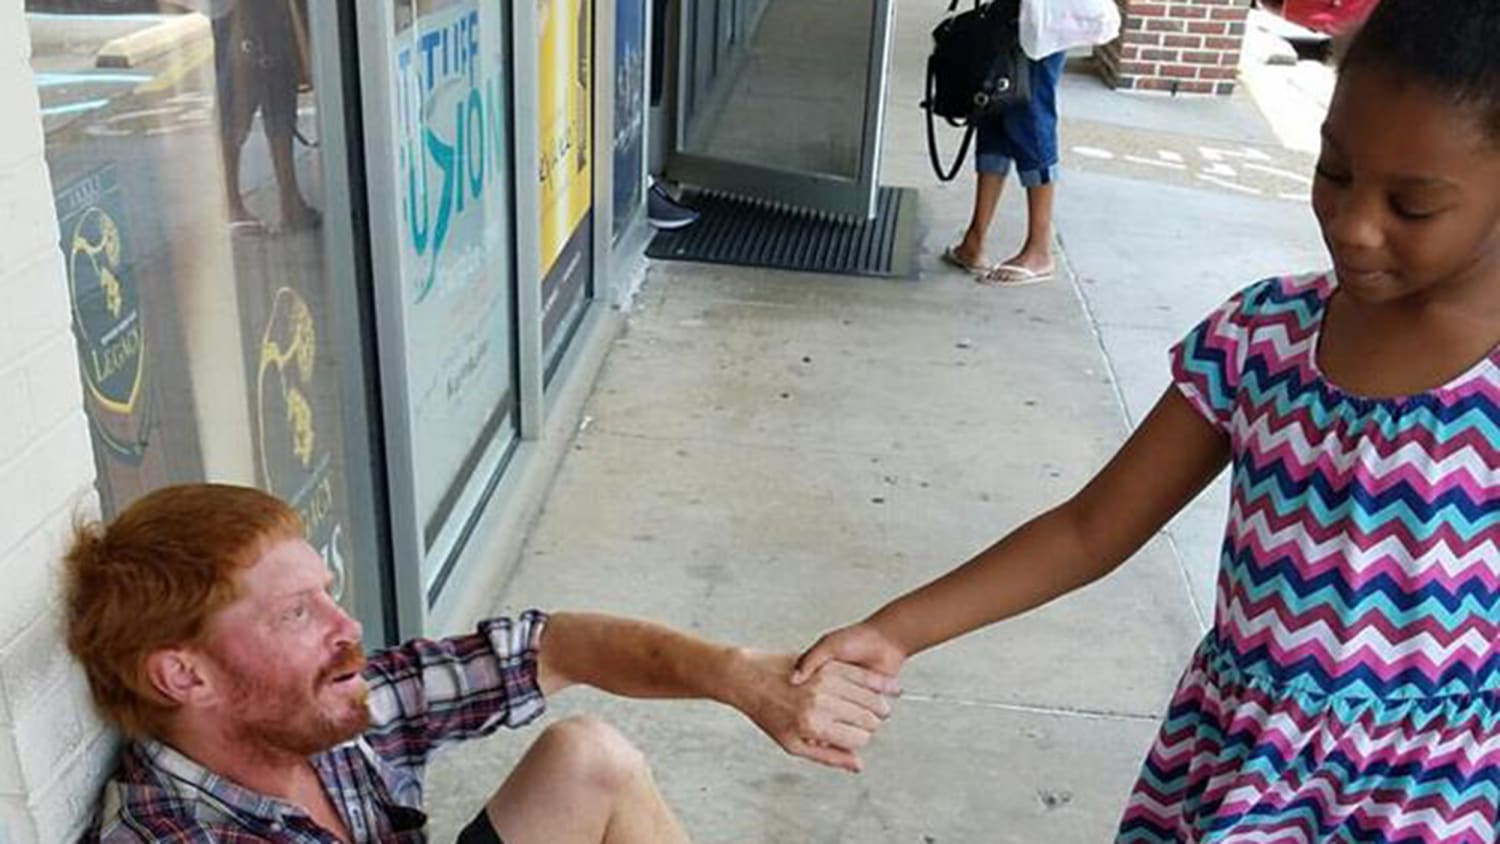 6-year-old shows compassion for a homeless man in tears